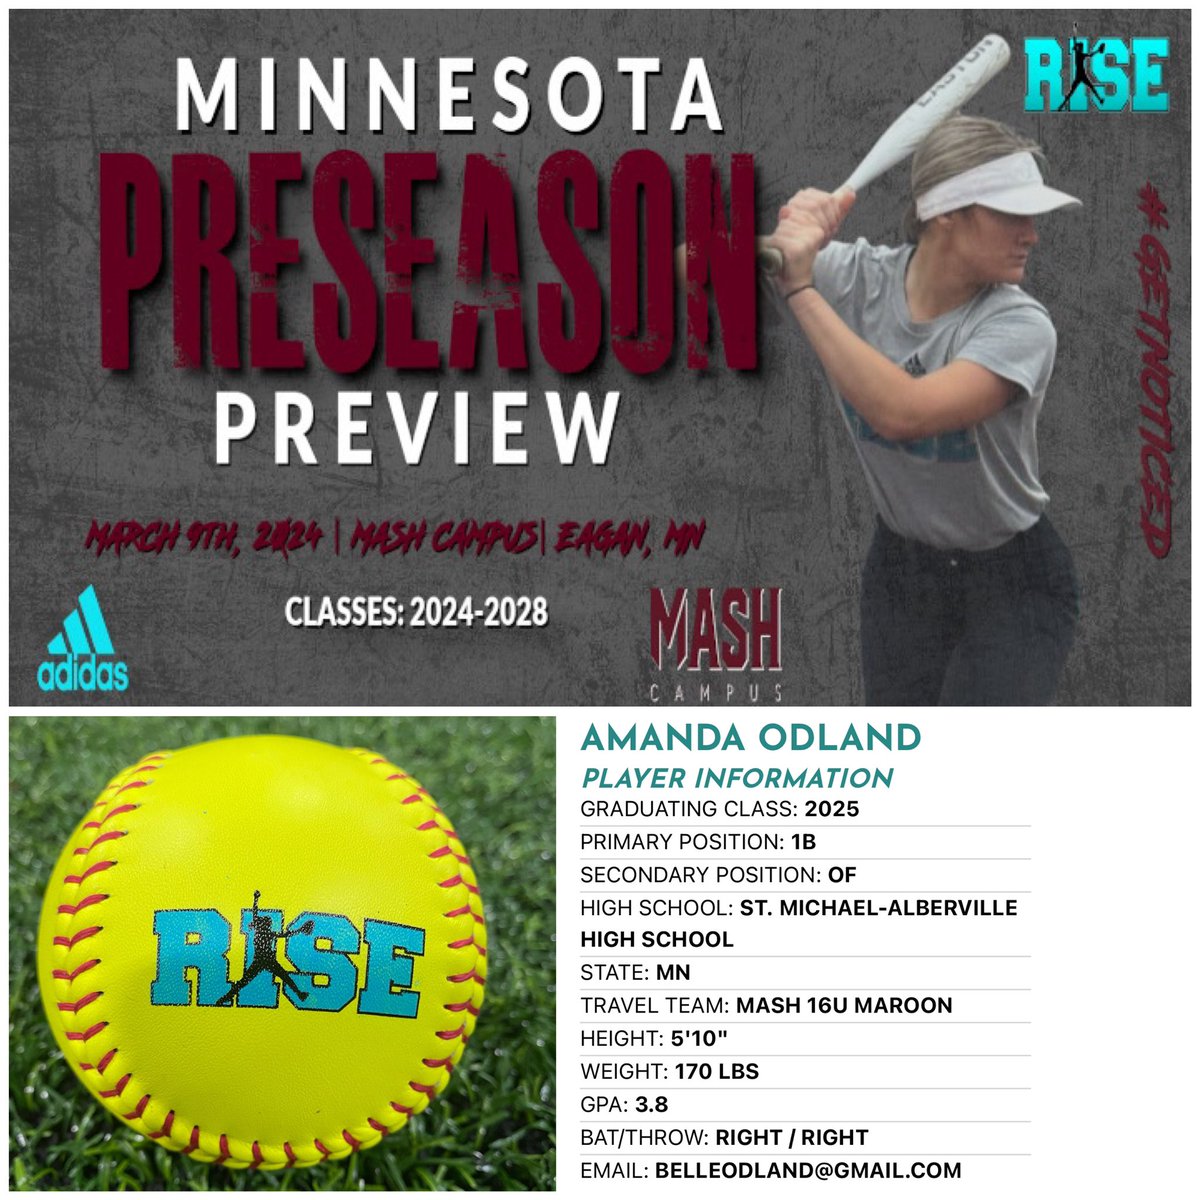 2025 Amanda Odland (St. Michael-Albertville HS & MN MASH) has been added to the roster! - #whosnext? #Adidas #getnoticed 4 DAYS AWAY, Register NOW➡️ form.jotform.com/90874692517166